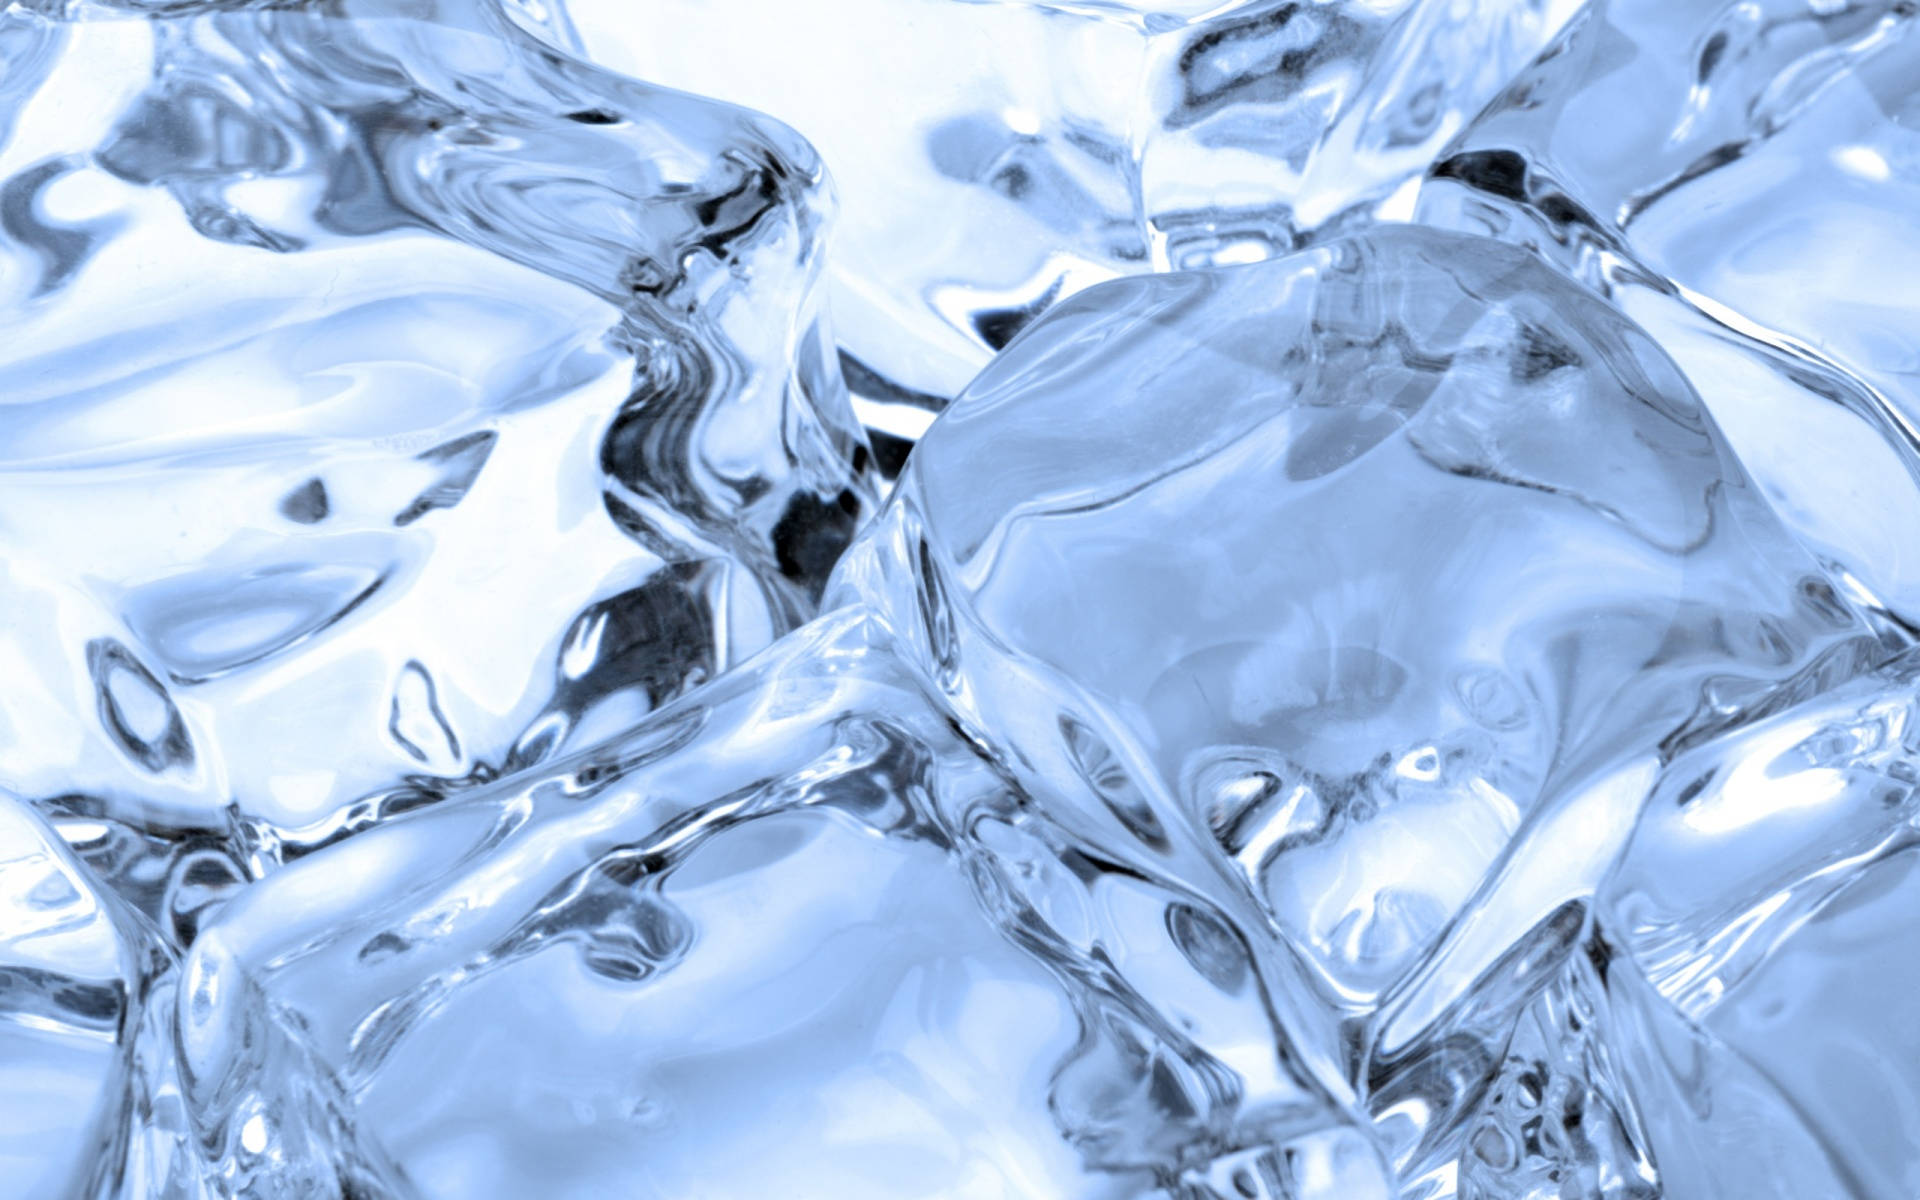 The Frozen Art - An Up-close View Of A Transparent Ice Cube Background